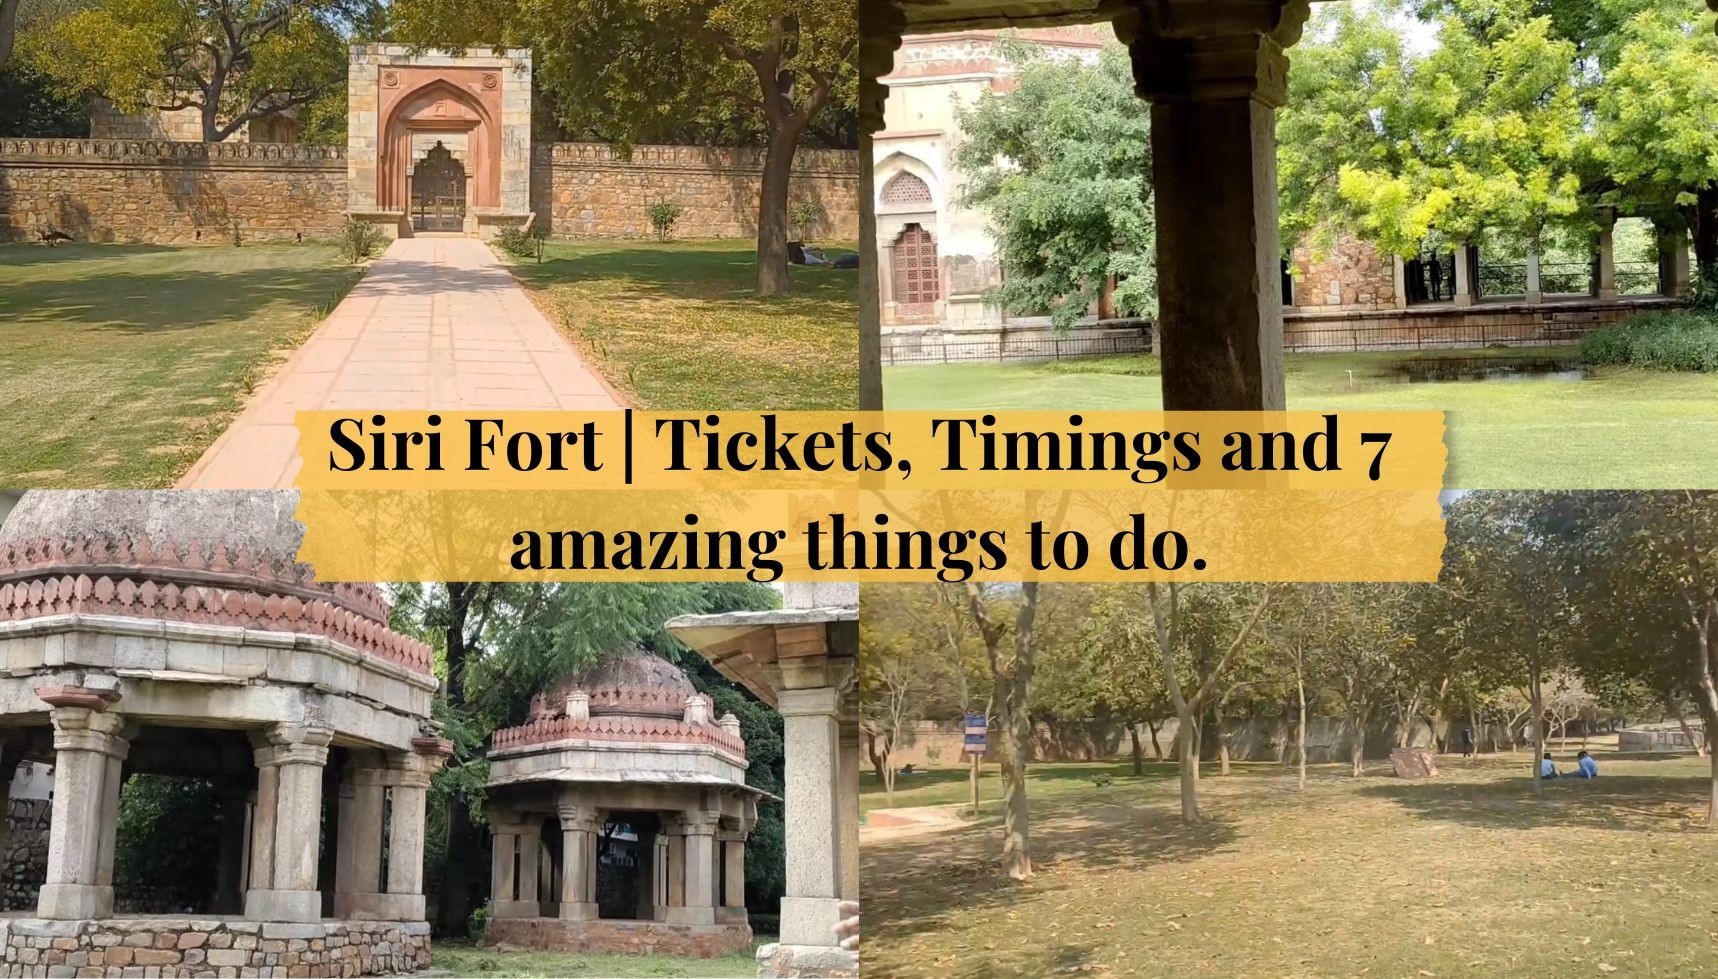 Explore Siri Fort in Delhi: Tickets, Timings, and 7 Amazing Activities